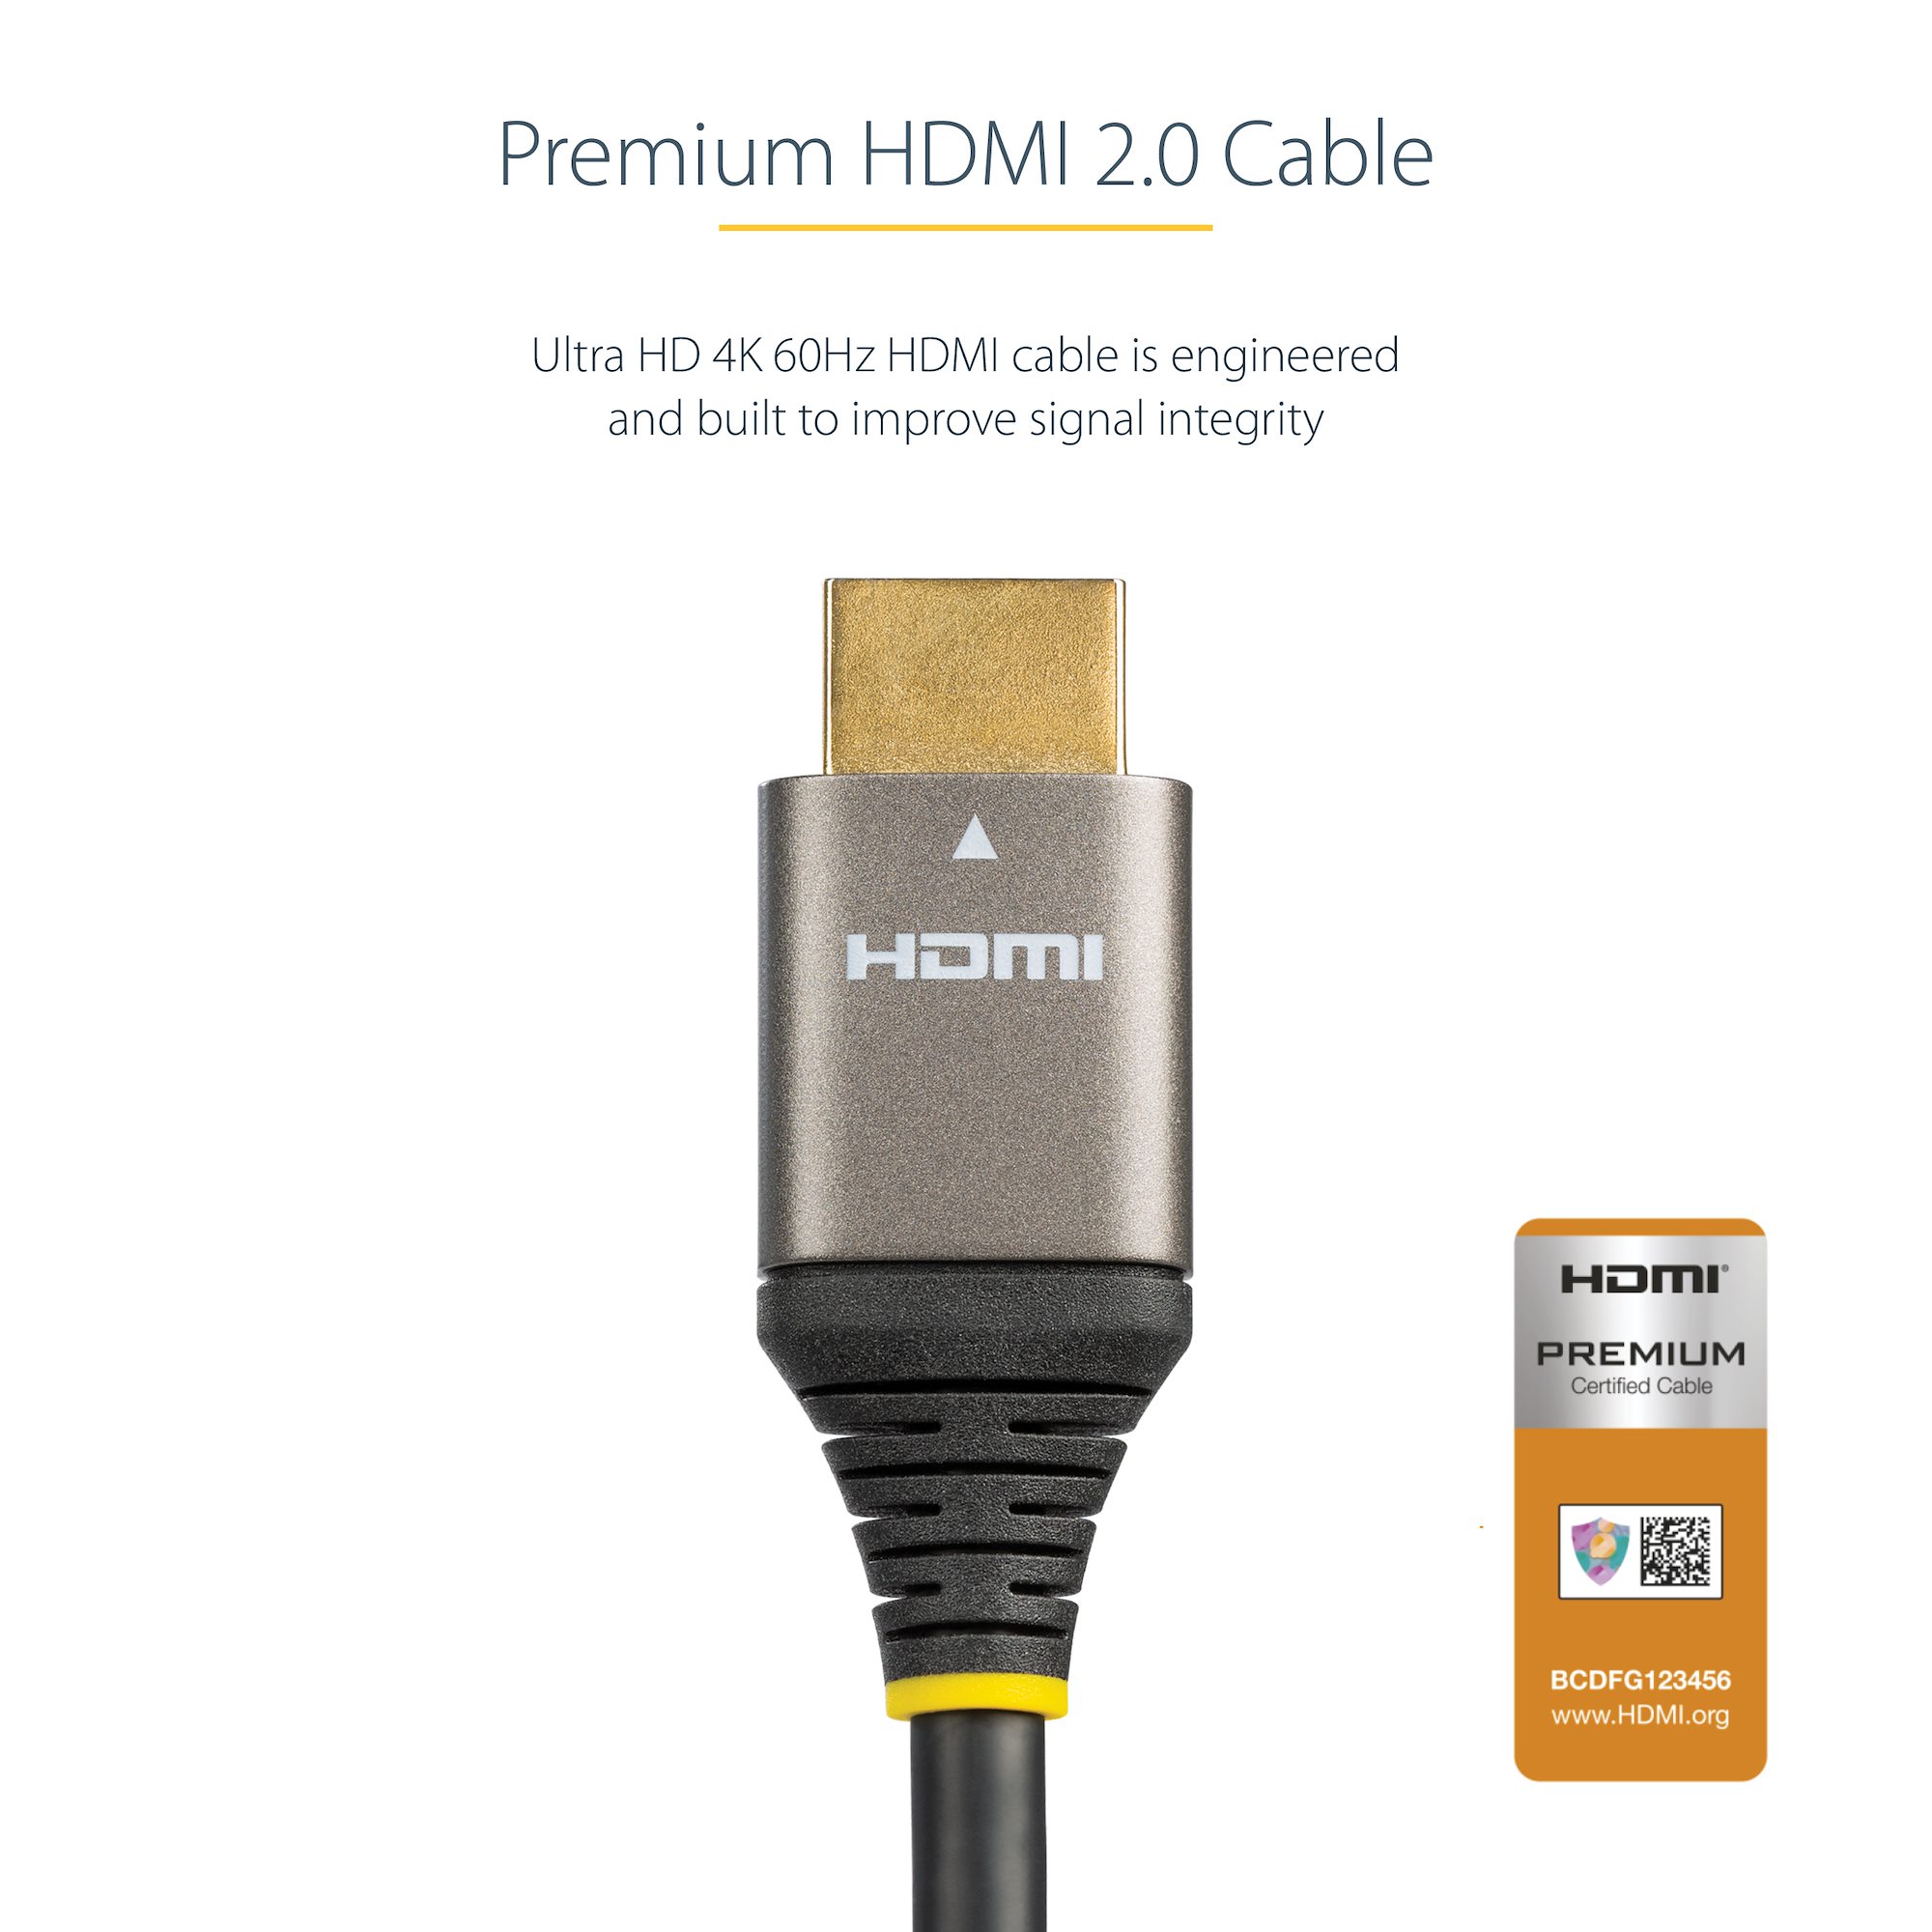 Duronic HDMI Cable HDC03 /3m â€“ 2.0 High Speed 4K 2160p 3D Ultra HD 3  Metre HDMI Cable with Ethernet - PS4, Xbox, Virgin